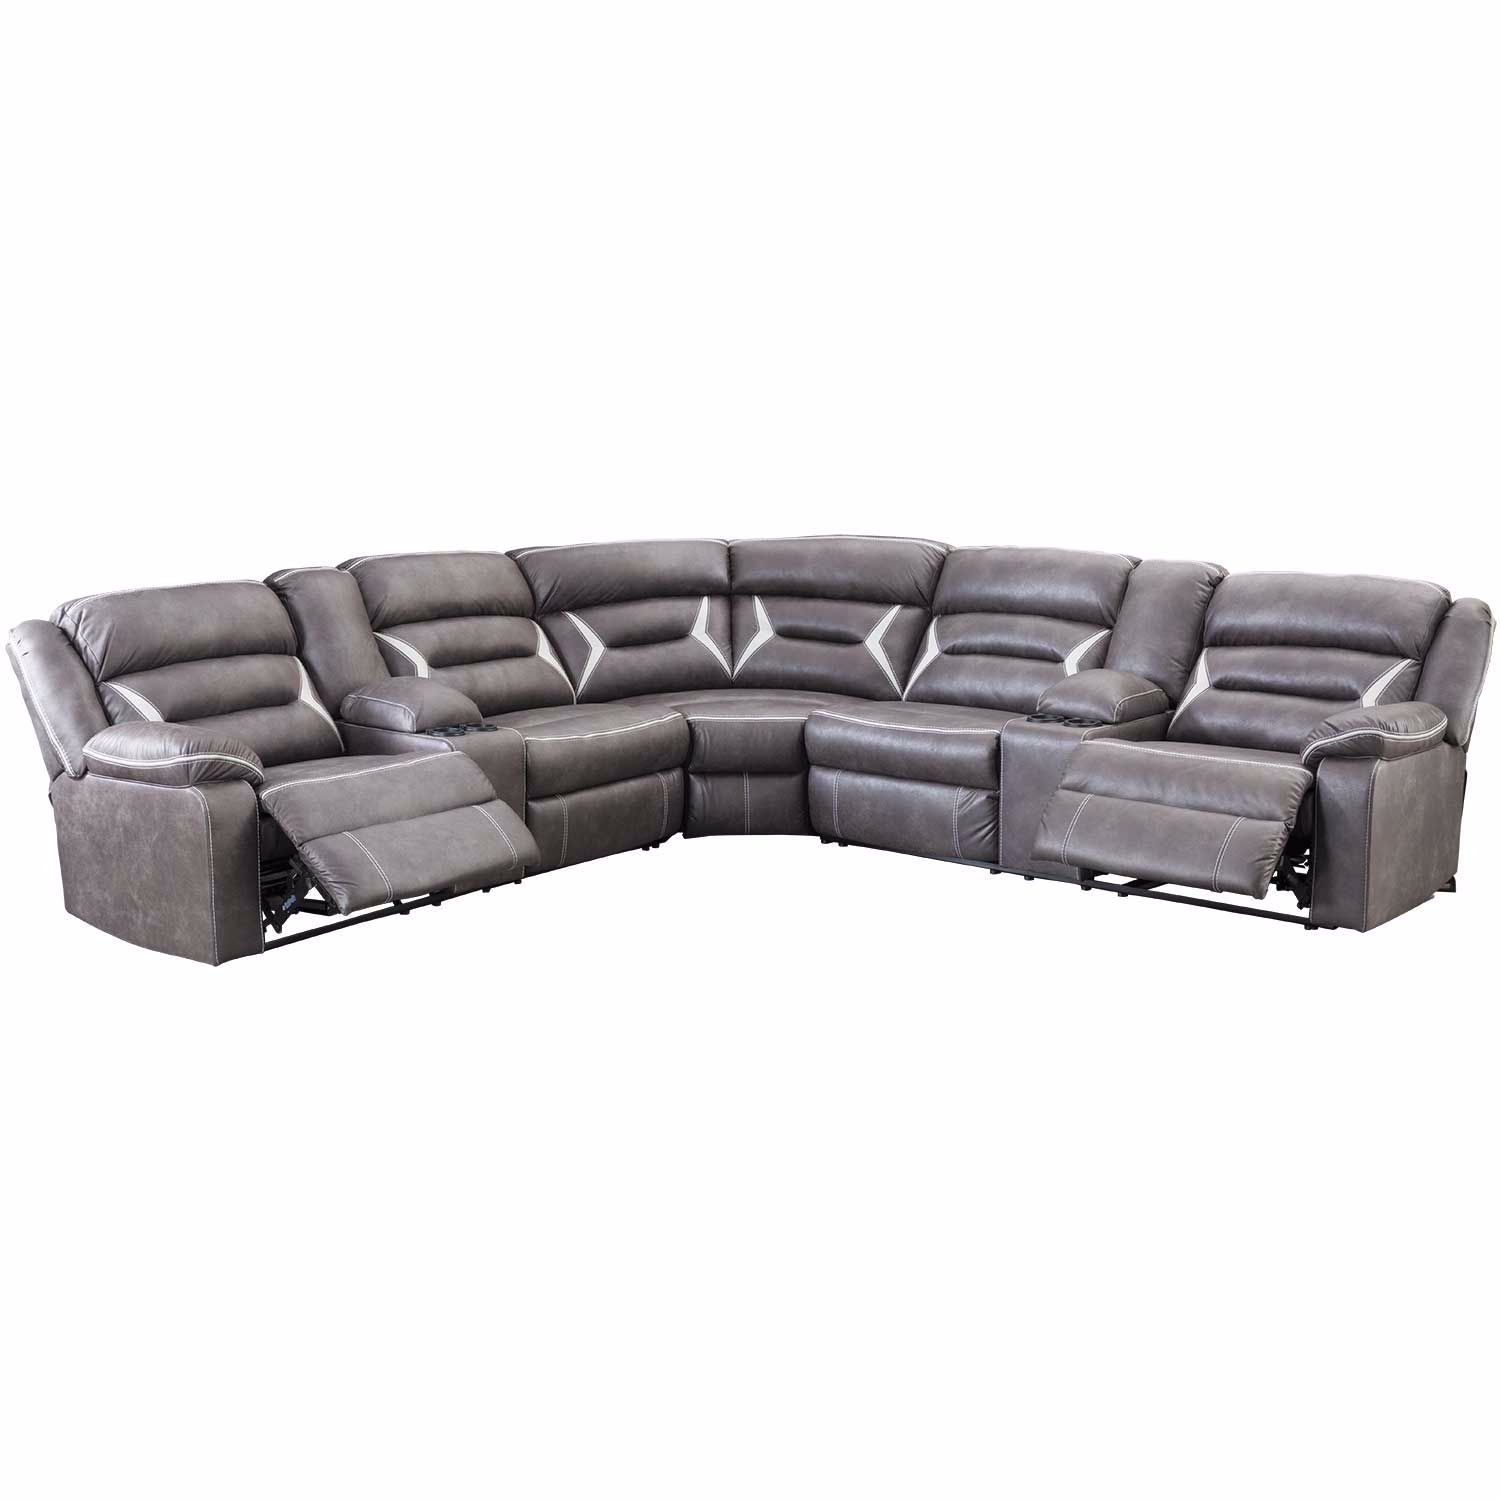 Kincord 3pc Power Recline Sectional 1310459 77 73 Ashley